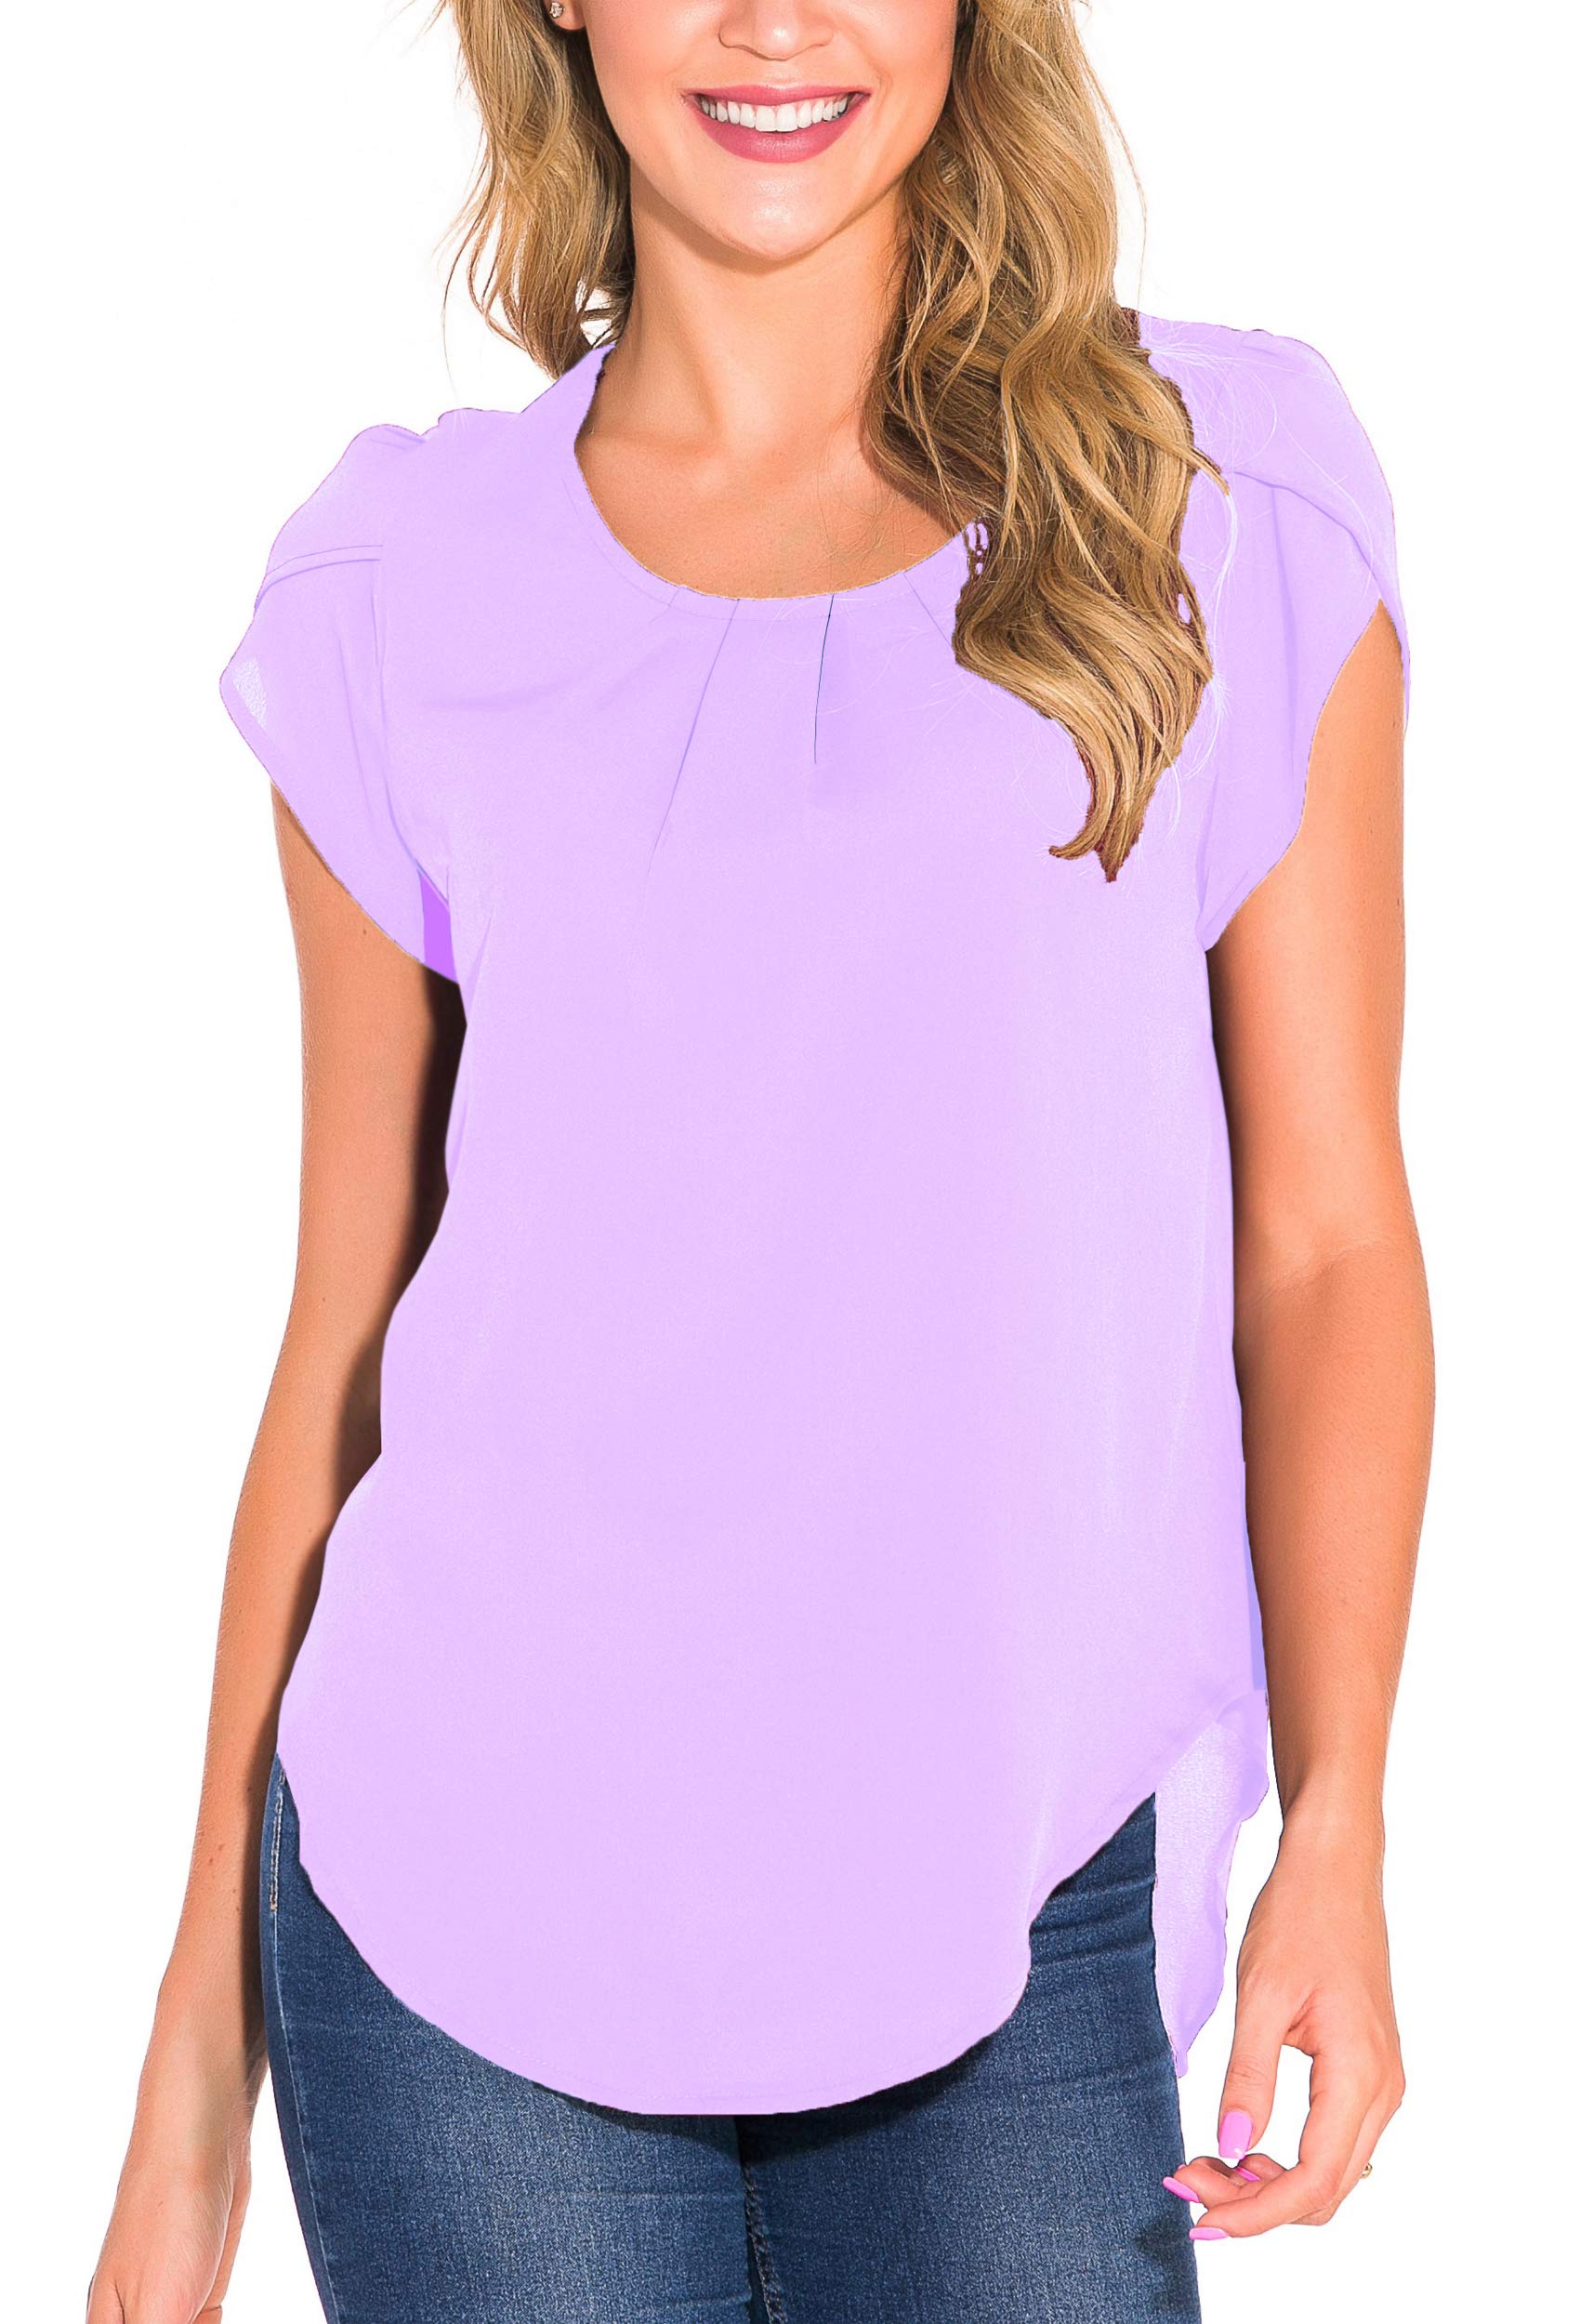 Book Cover Fronage Women's Summer Short Sleeve Pleated Tops Work Casual Keyhole Back Shirts Blouse Small Light Purple